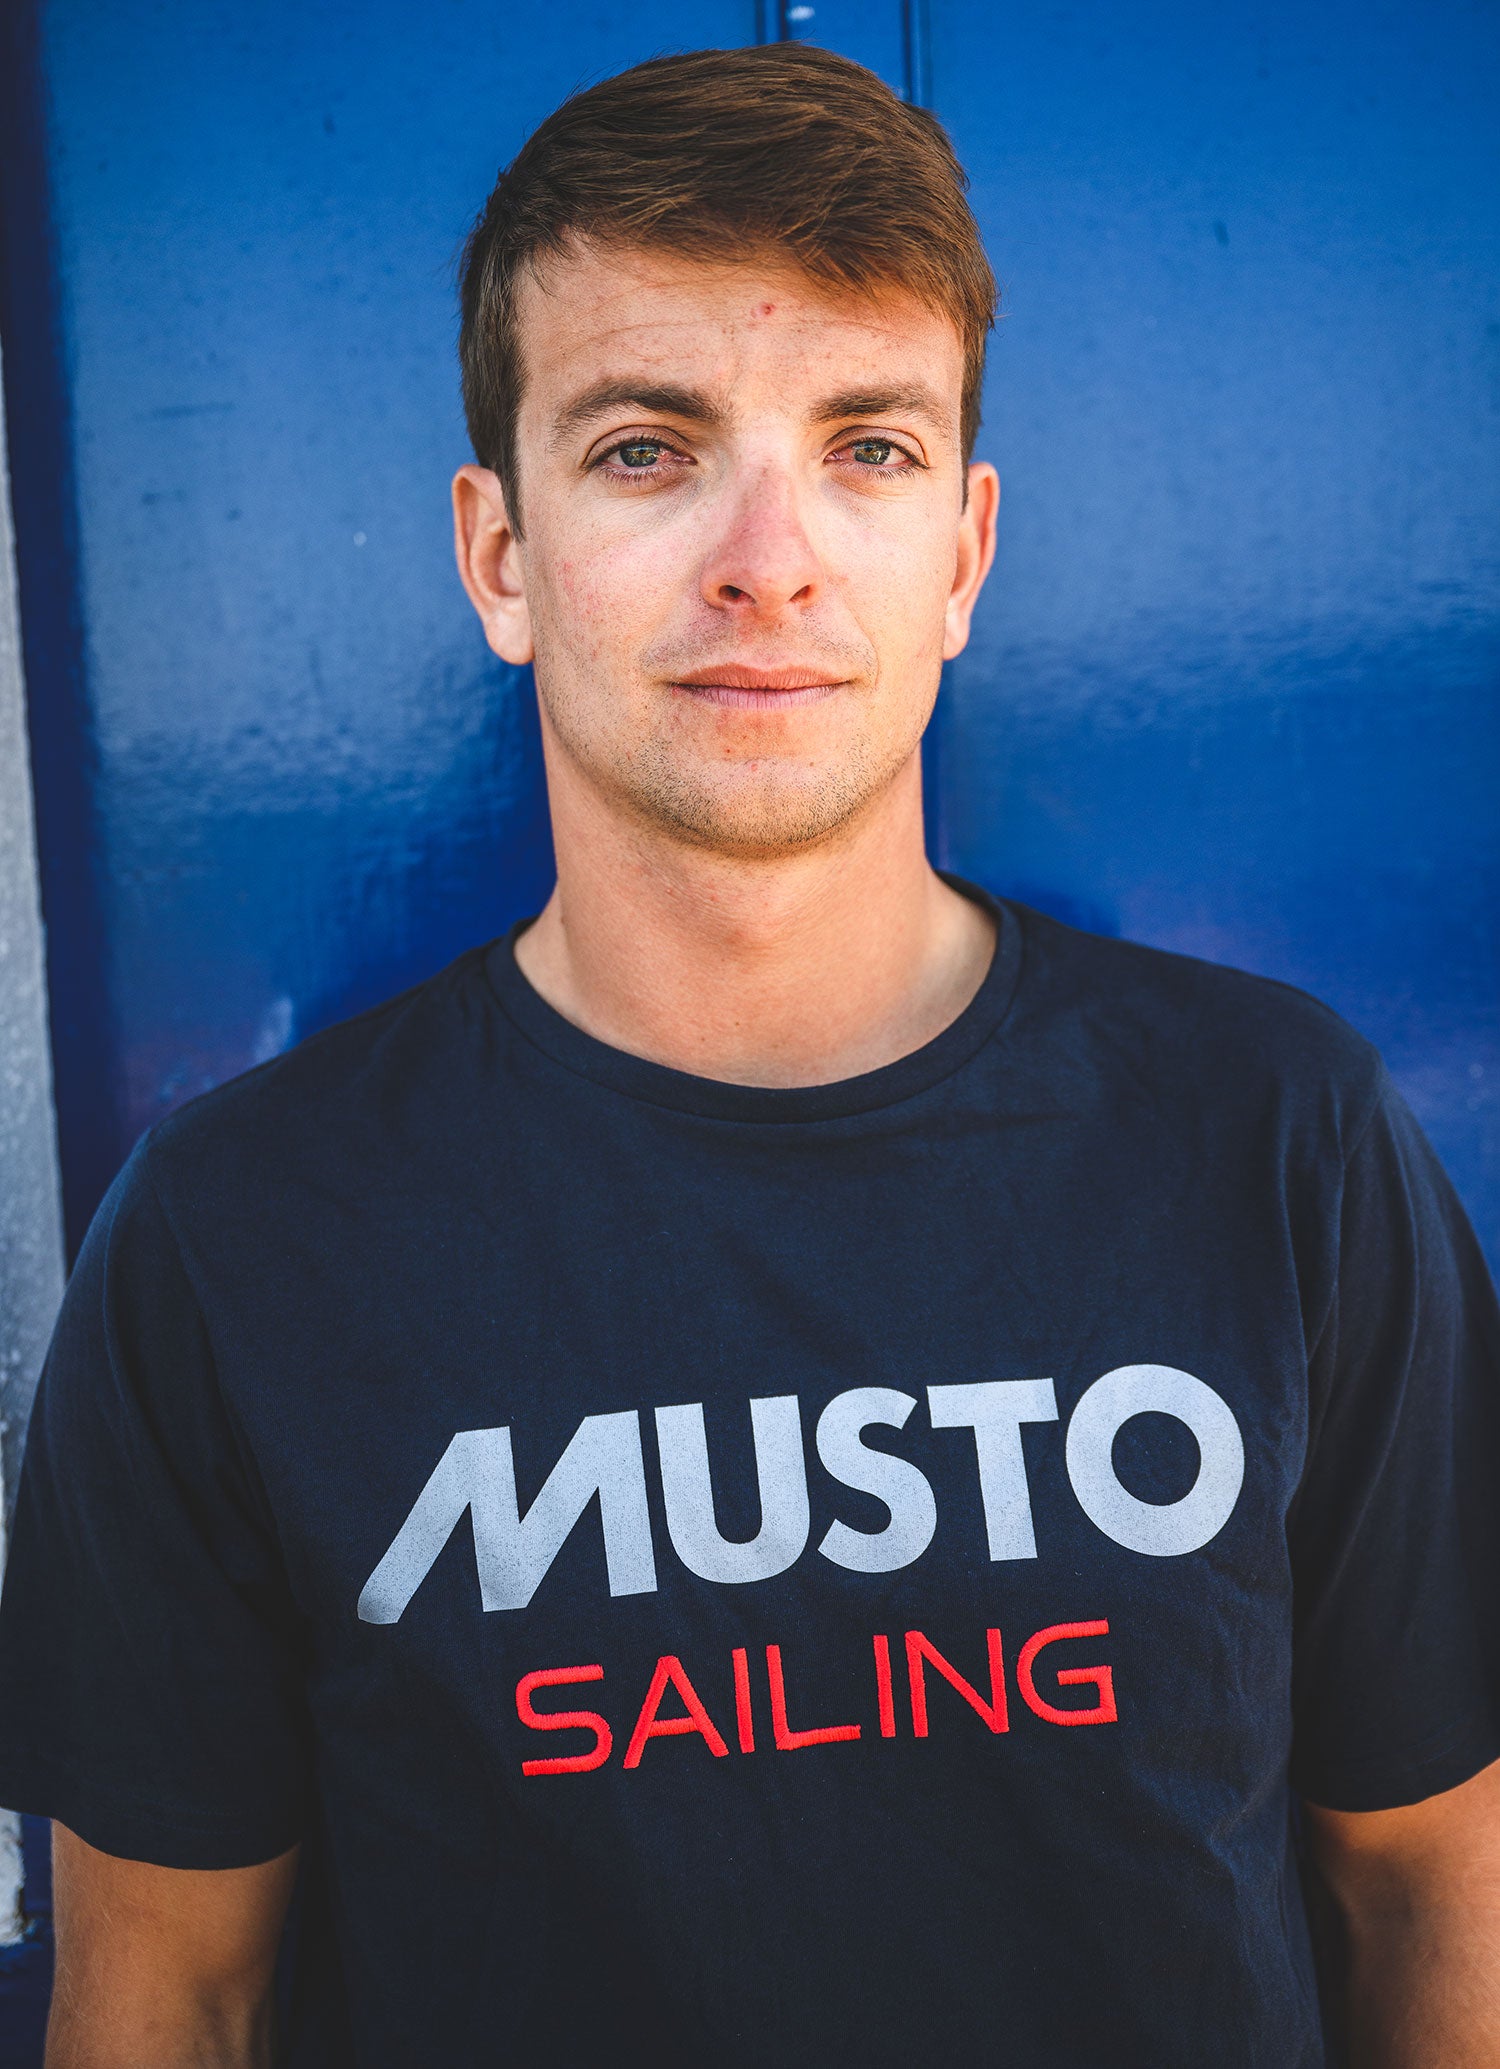 Musto Sailing branded soft cotton jersey tee